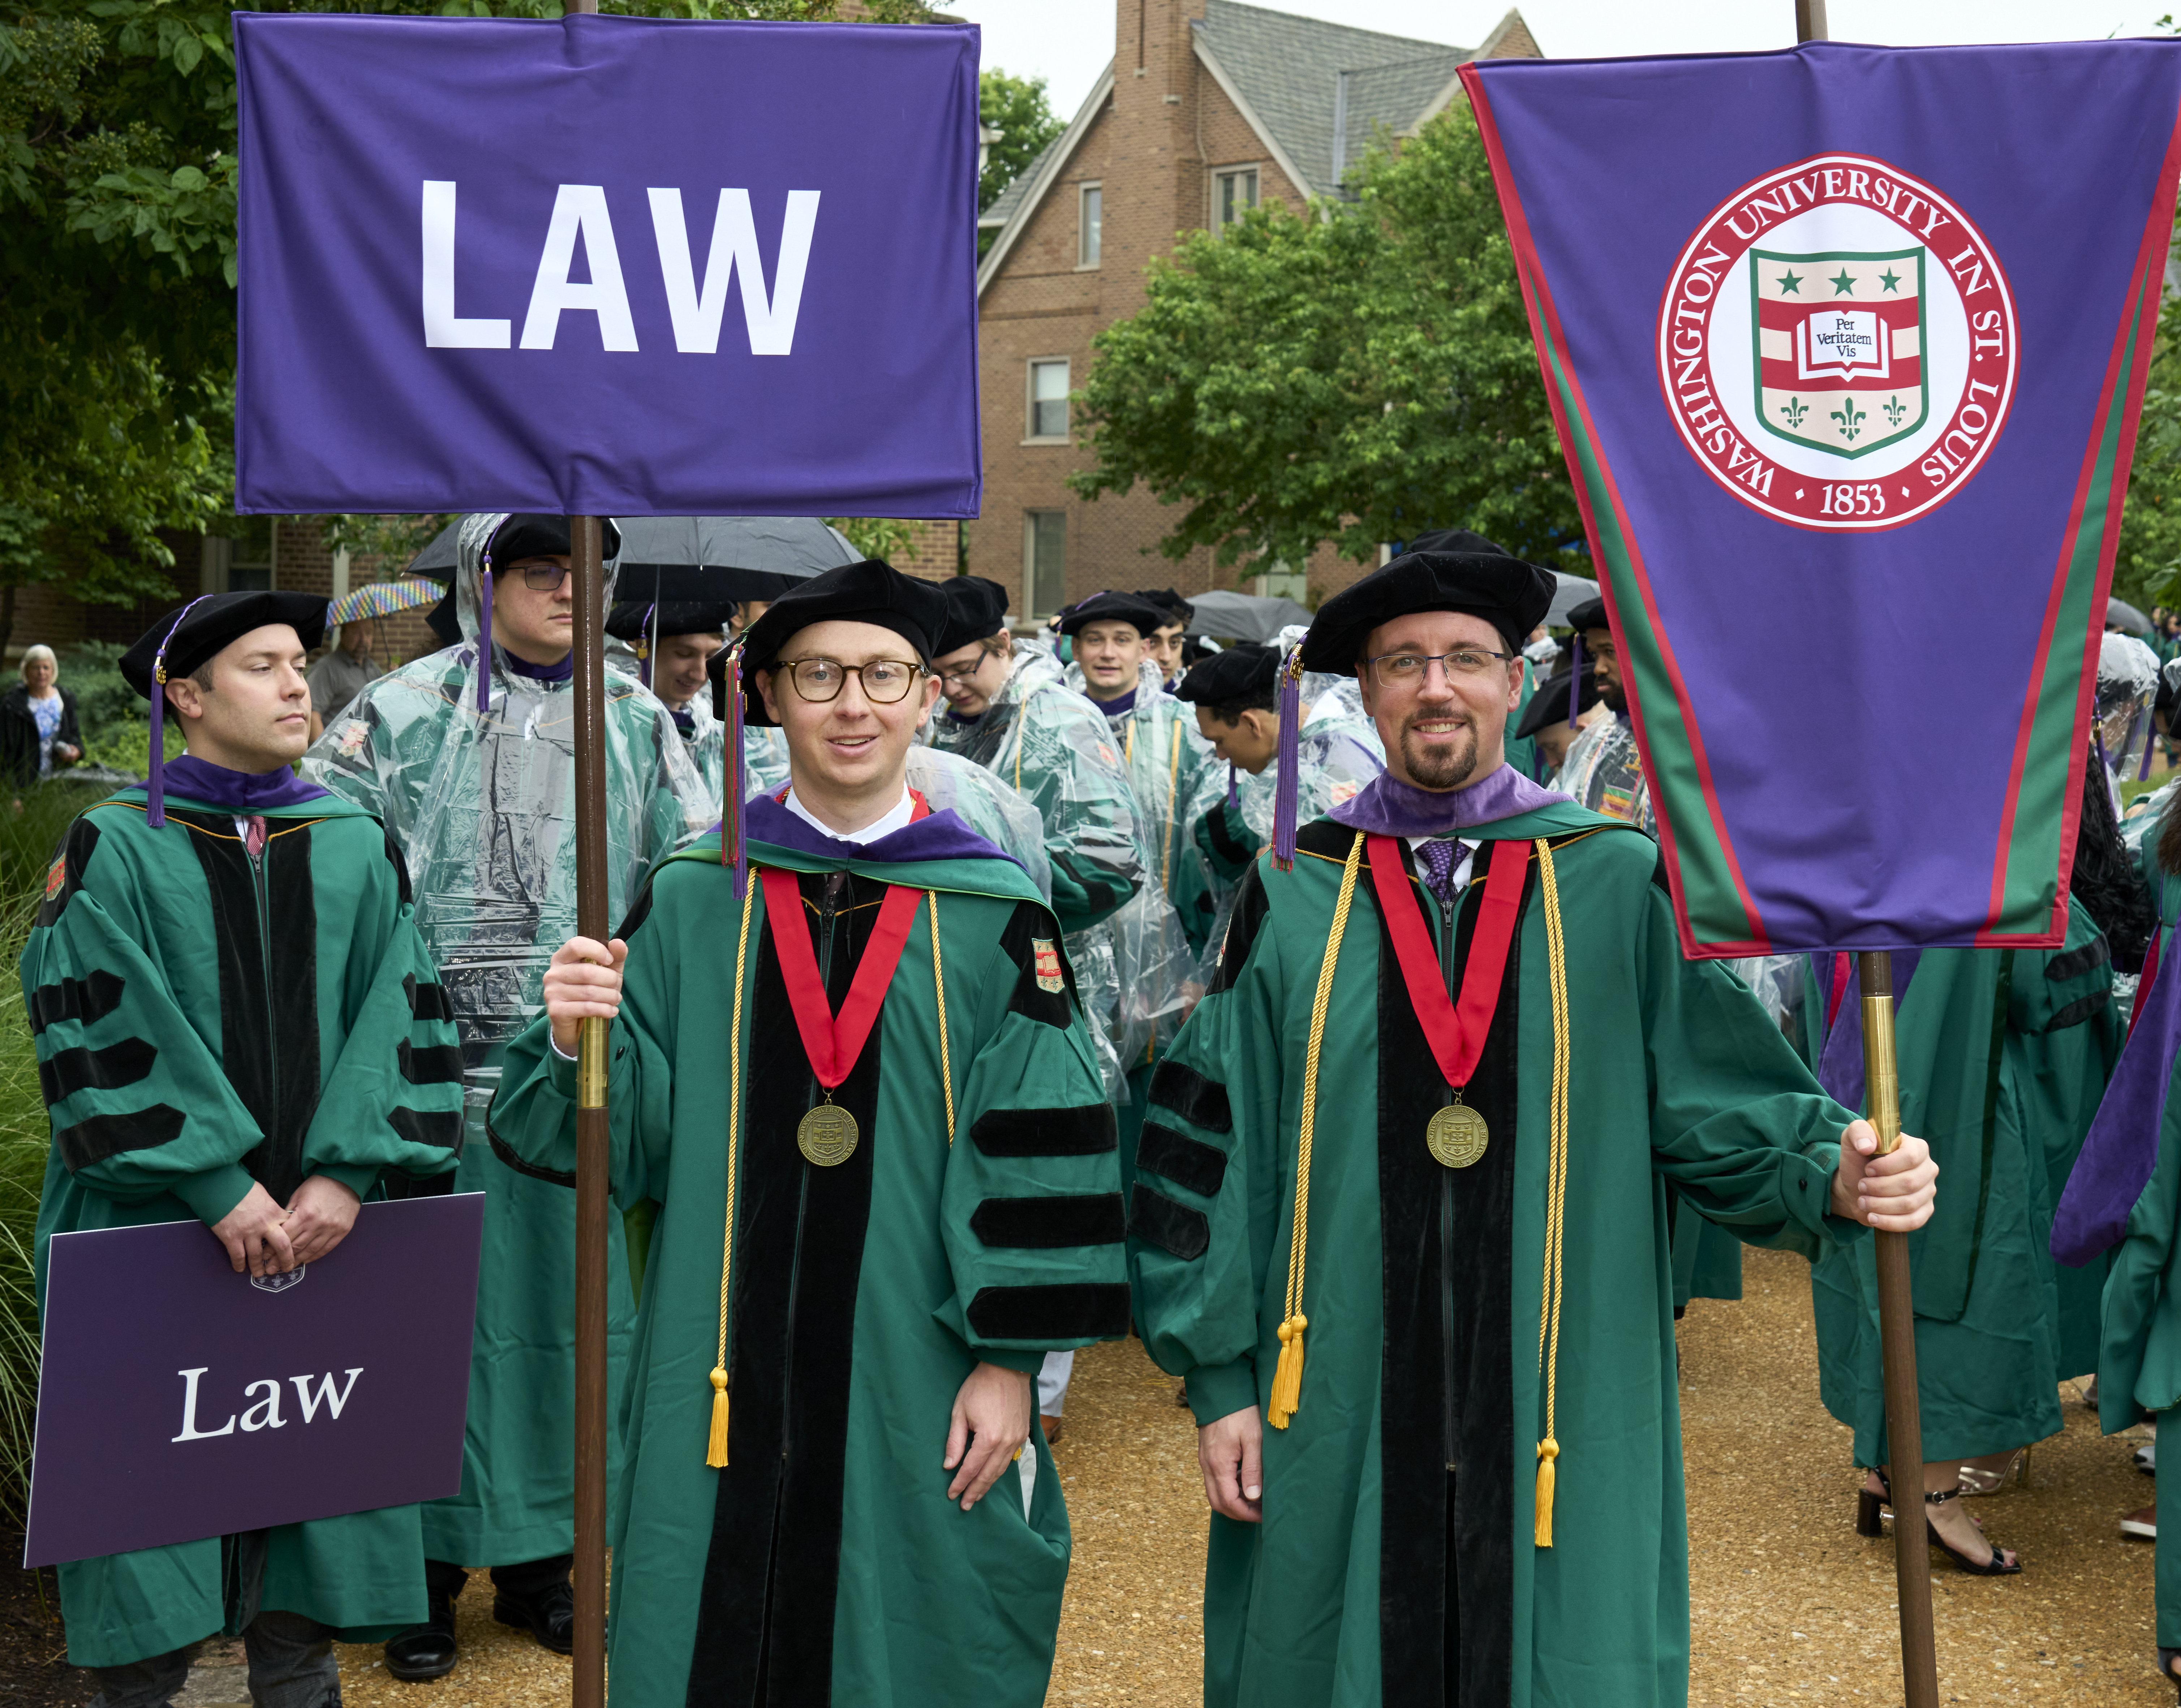 Gavin McGimpsey and another student dressed in academic regalia and holding processional banners.